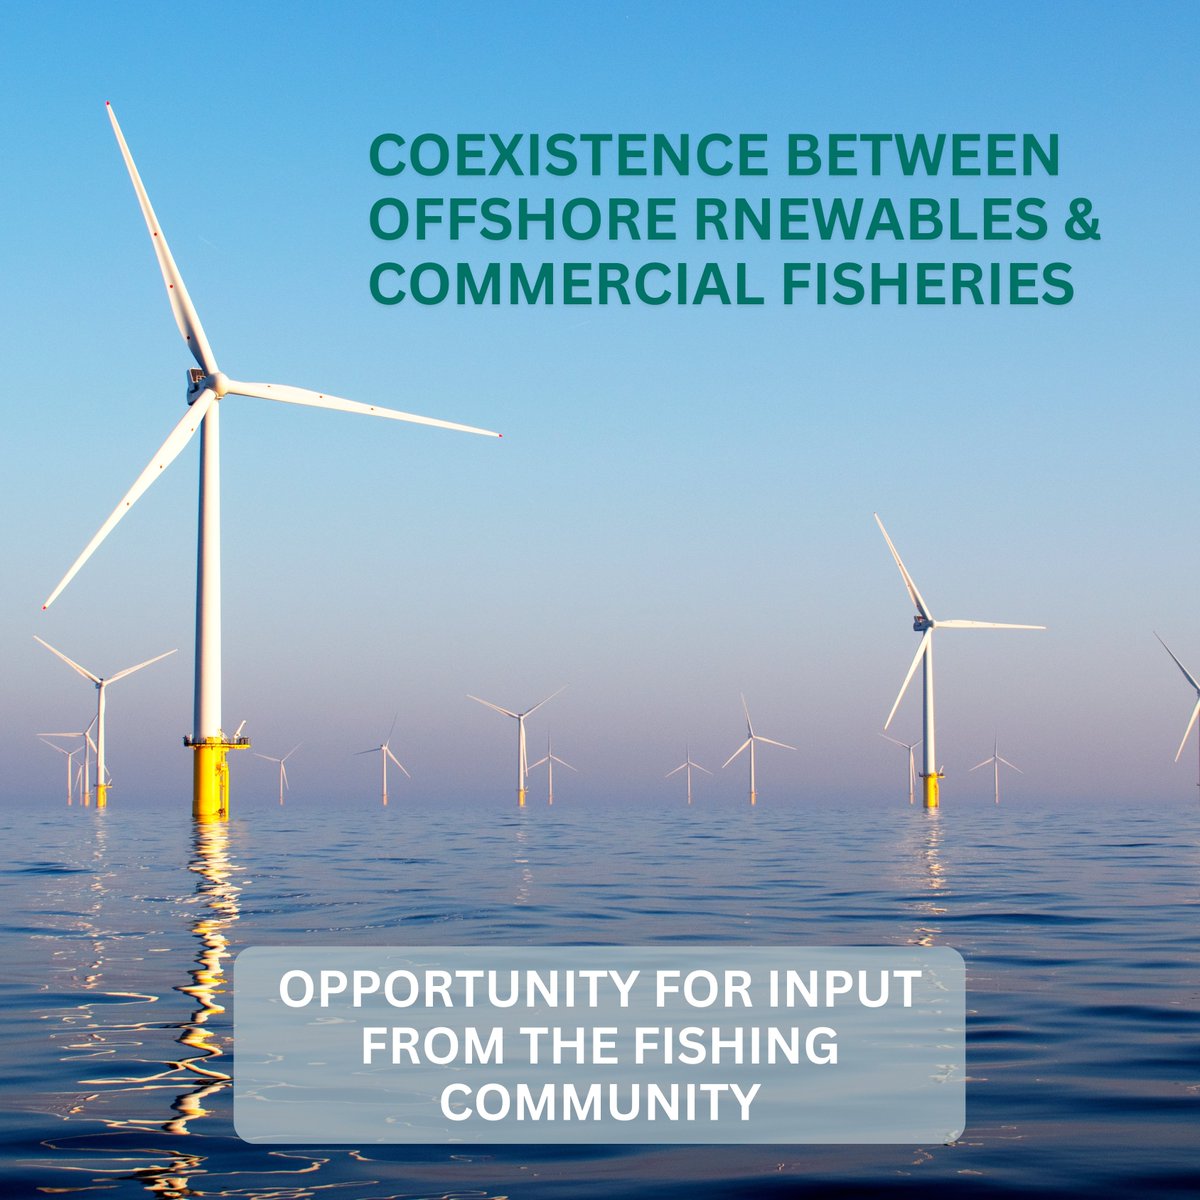 The Offshore Renewables Joint Industry Programme (ORJIP) are inviting the fishing community to input their experiences as part of the first stage asking for fishers experiences with offshore renewables. IF YOU WANT TO BE INVOLVED in this process email: Fisheries@intertek.com